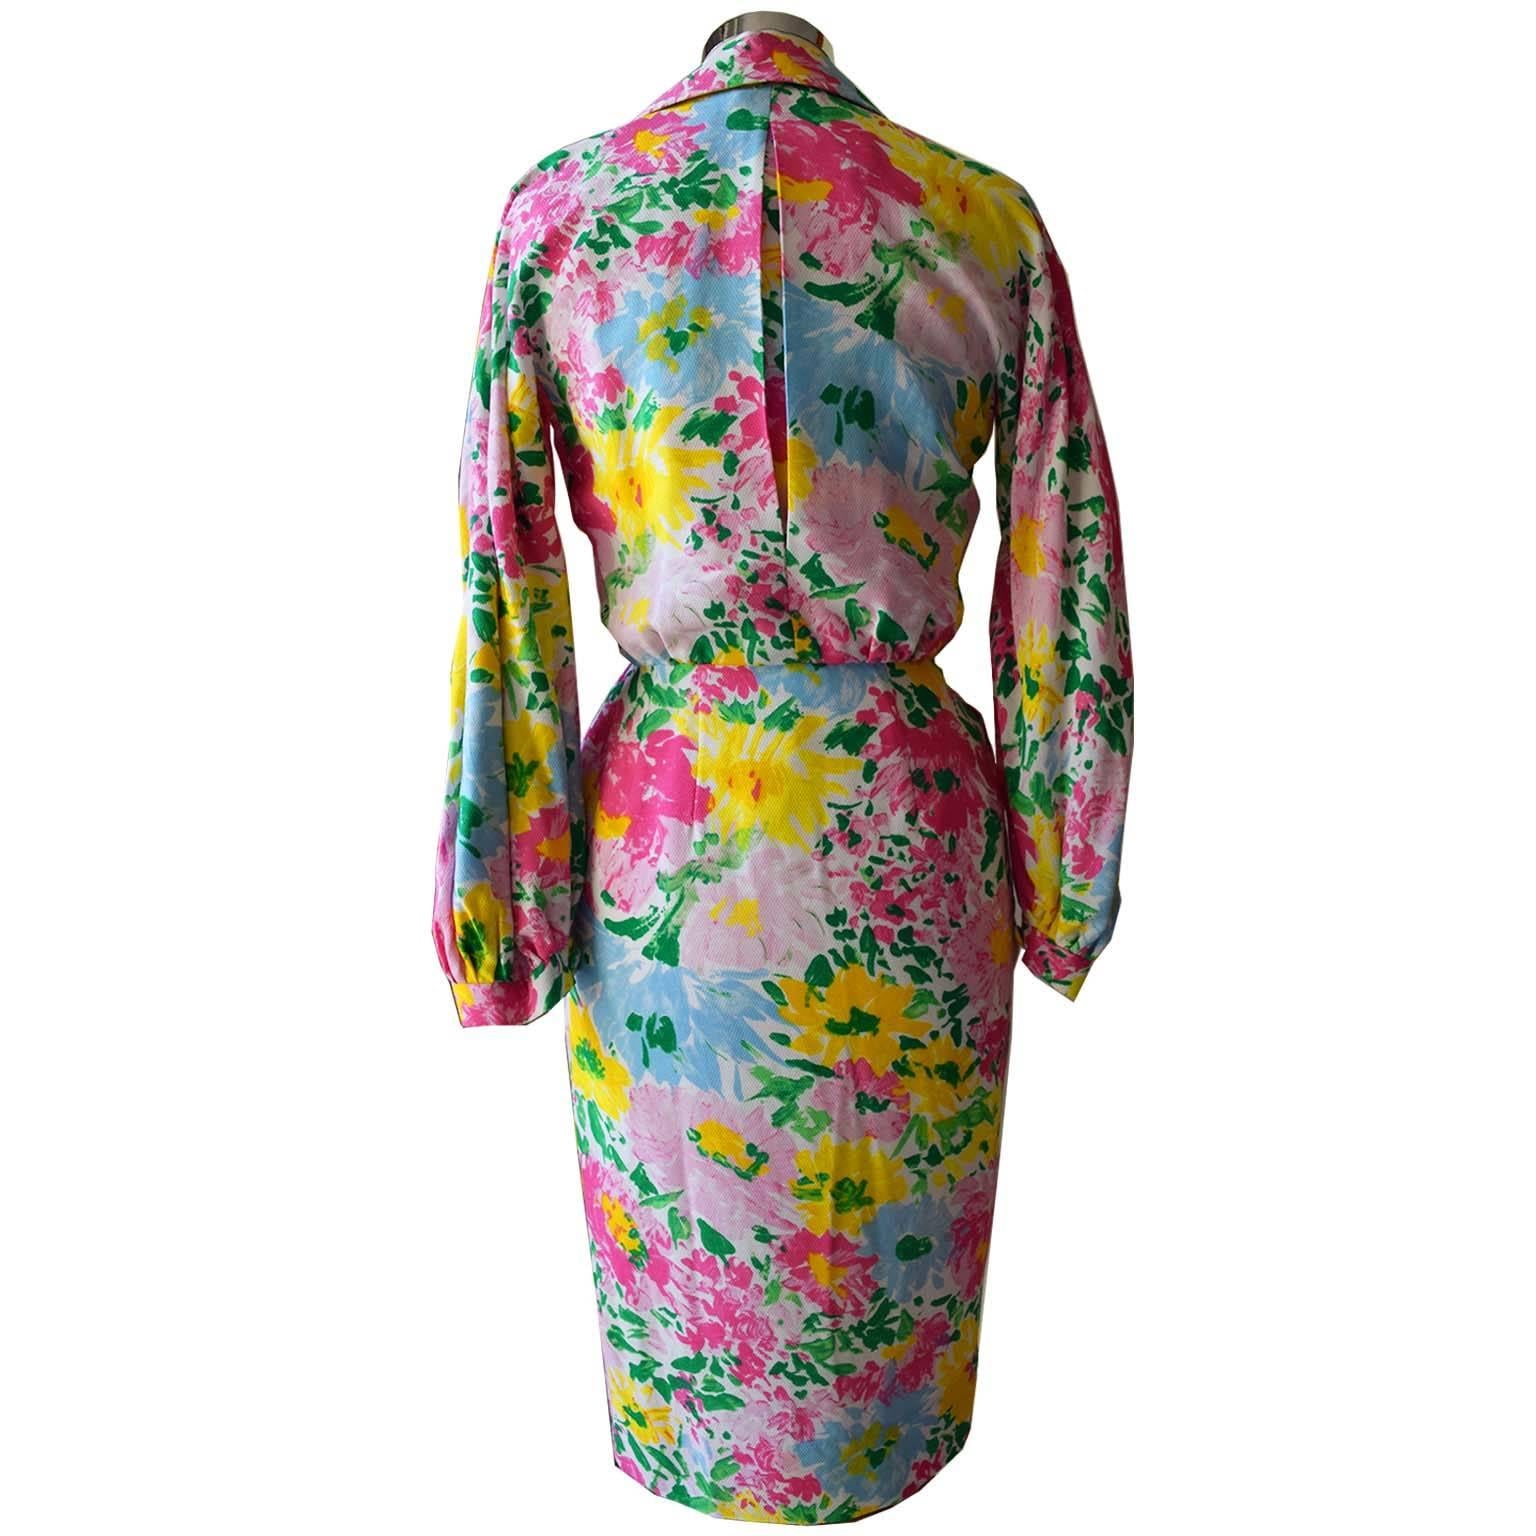 Christian Dior pret-a-porter 'Modele Exportation' floral print collared wrap dress from late 80s. Superbly colourful floral print. Bishop style sleeves. Blouse part is lined in a fine silk mesh fabric, skirt part is lined in heavier fabric. Skirt